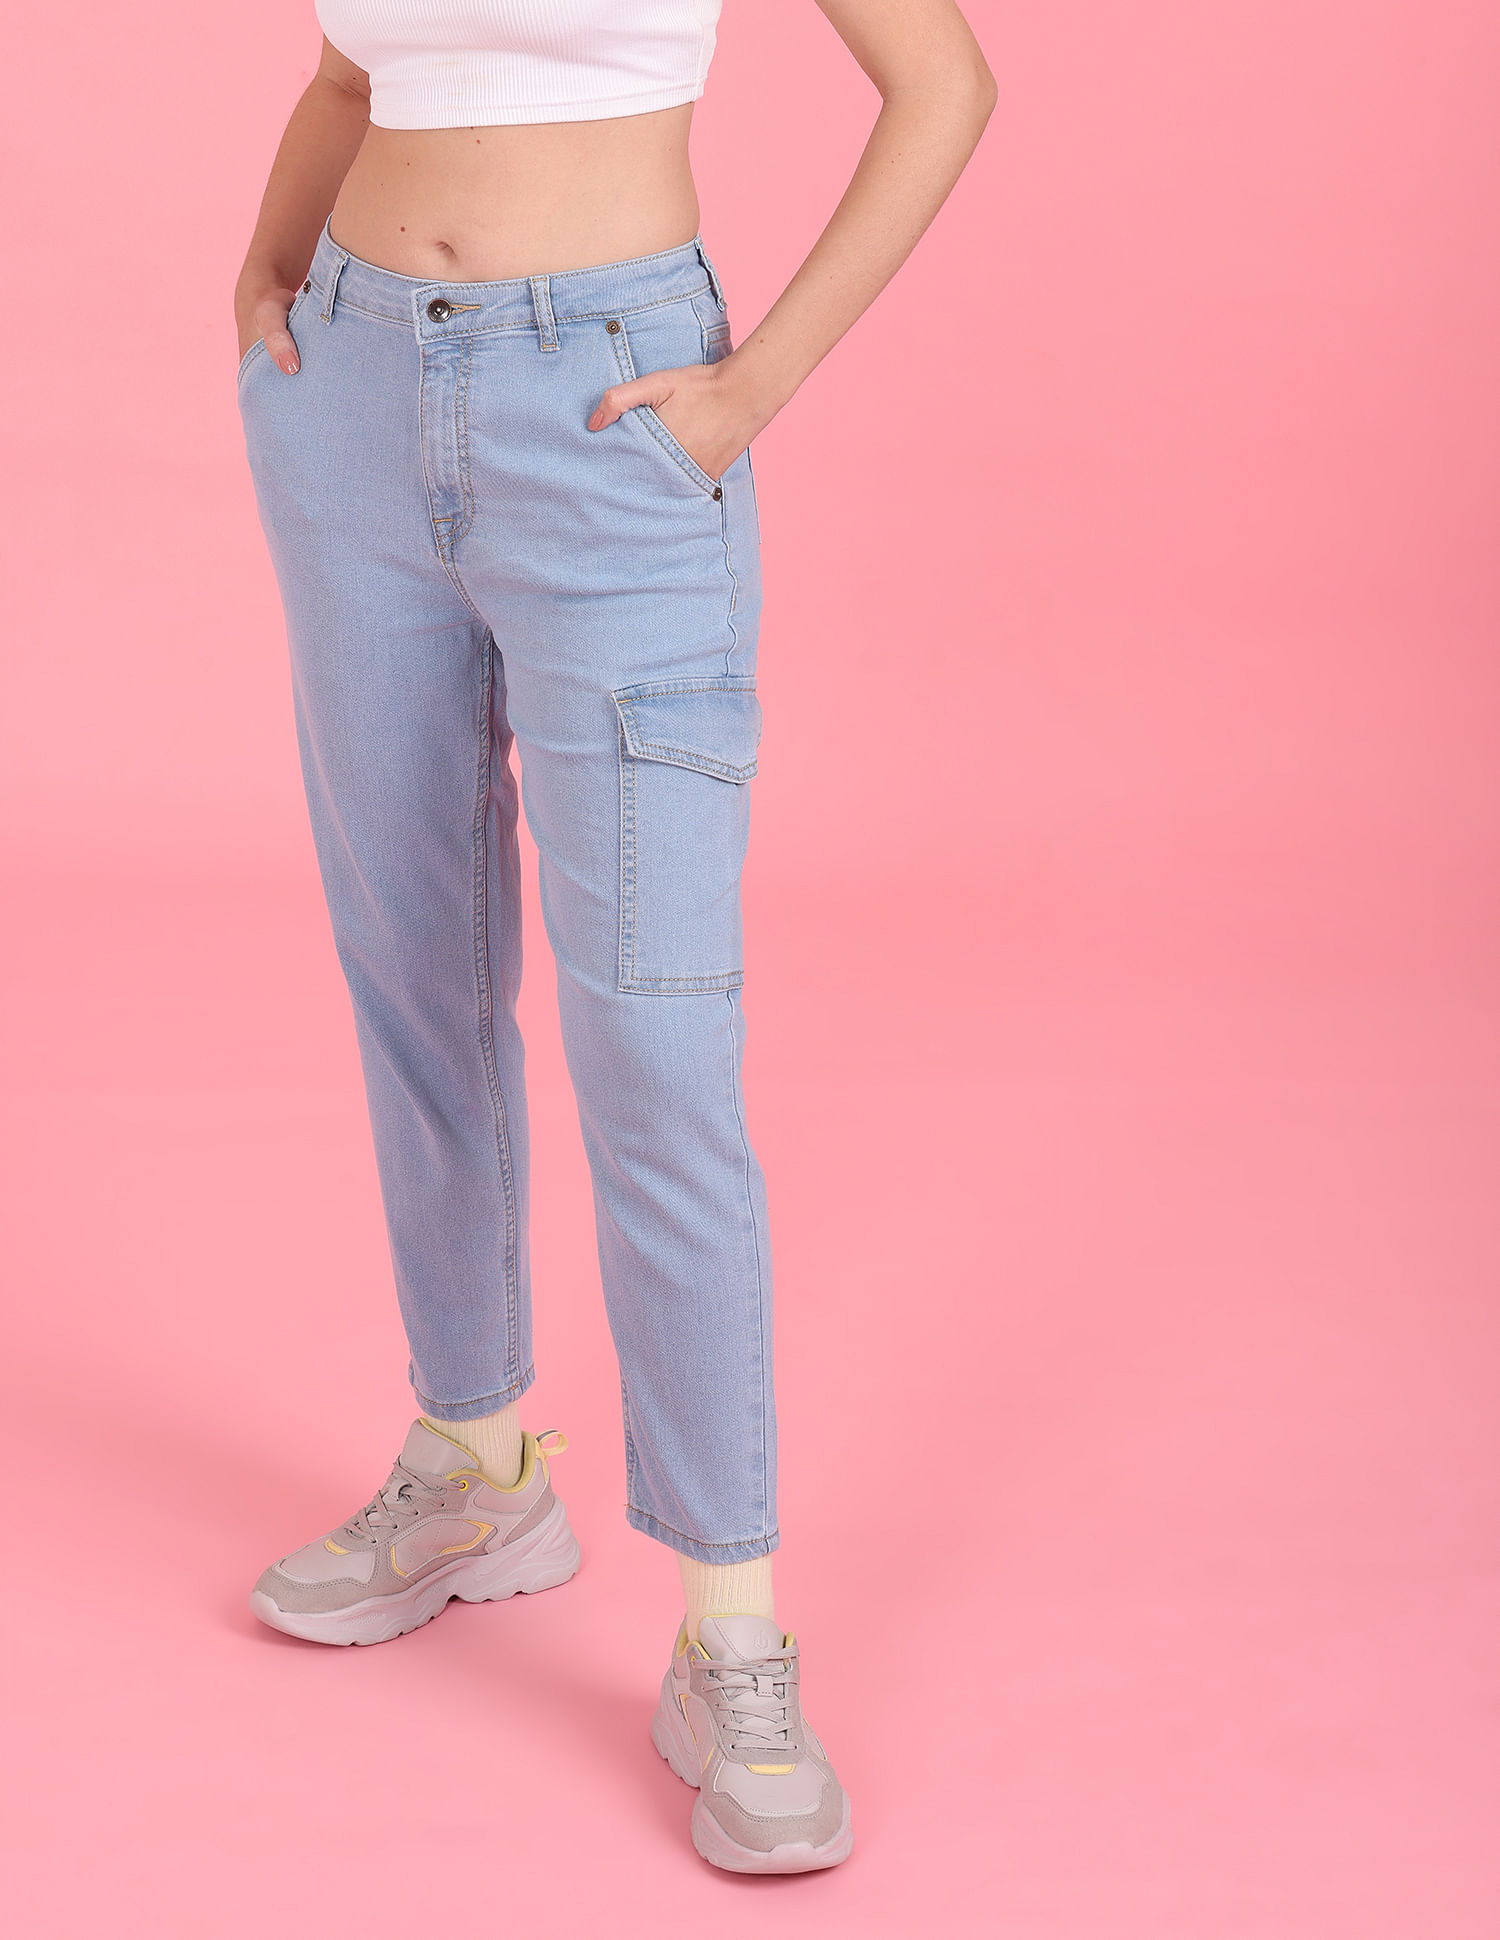 The New Yorker Skinny High Waist Jeans by Madish | INR ₹995-saigonsouth.com.vn